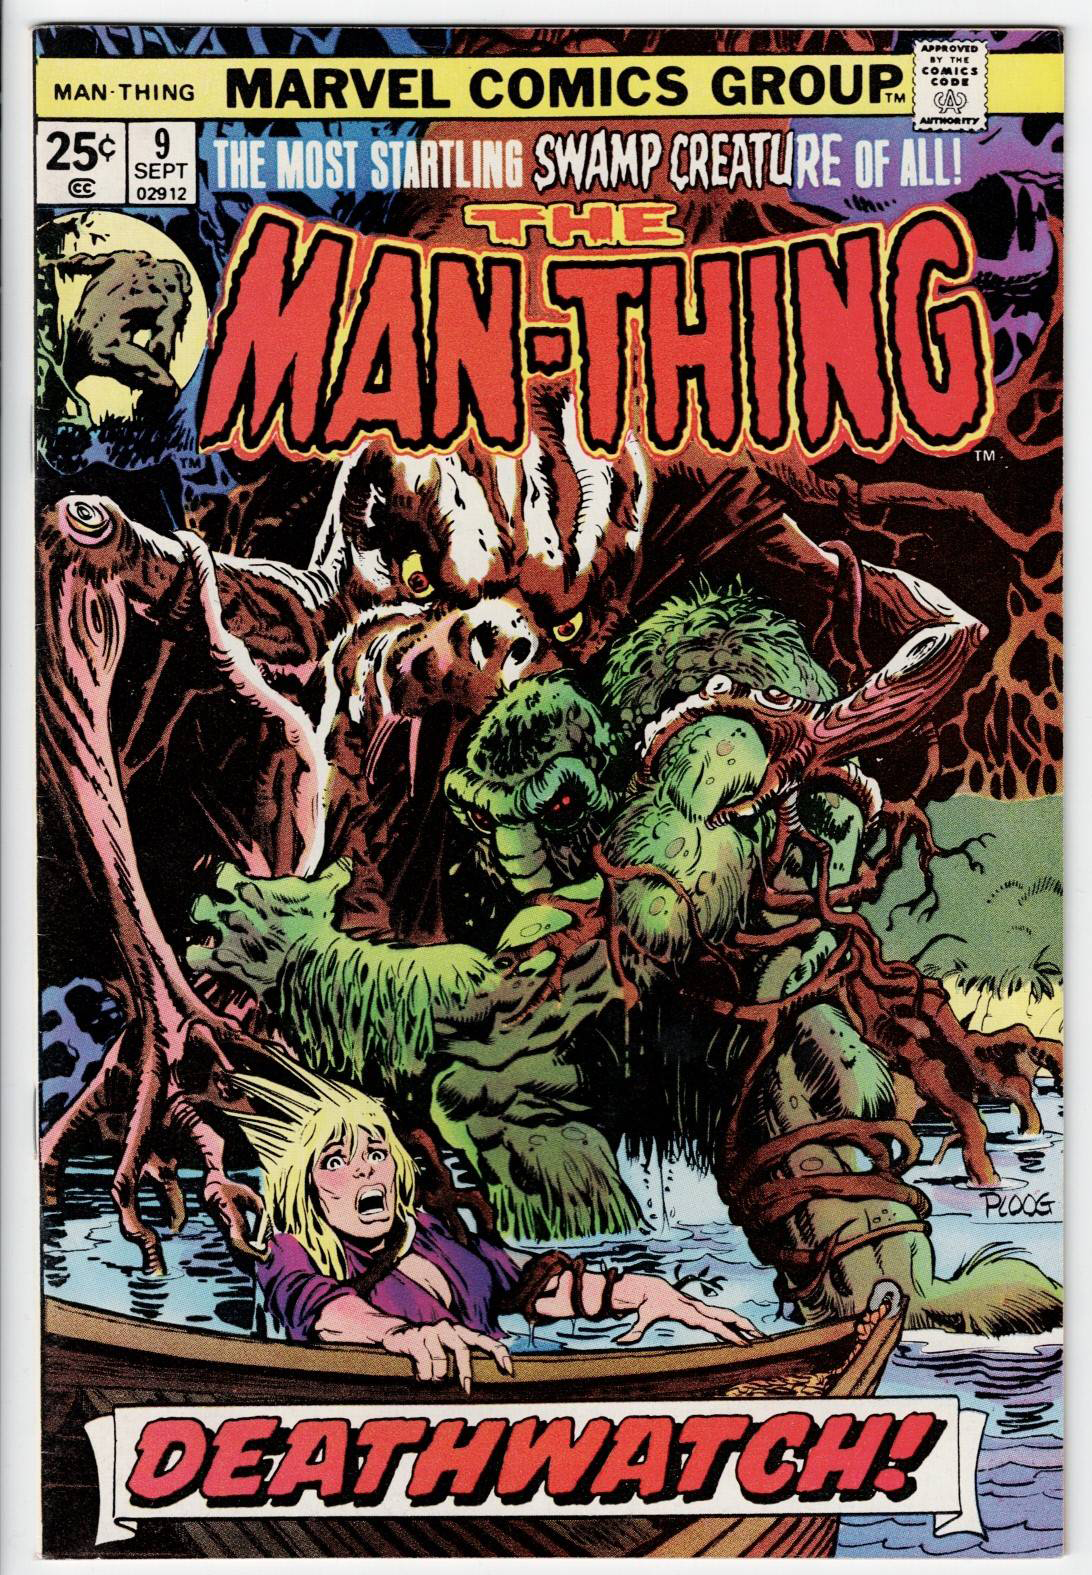 Man-Thing #9 front